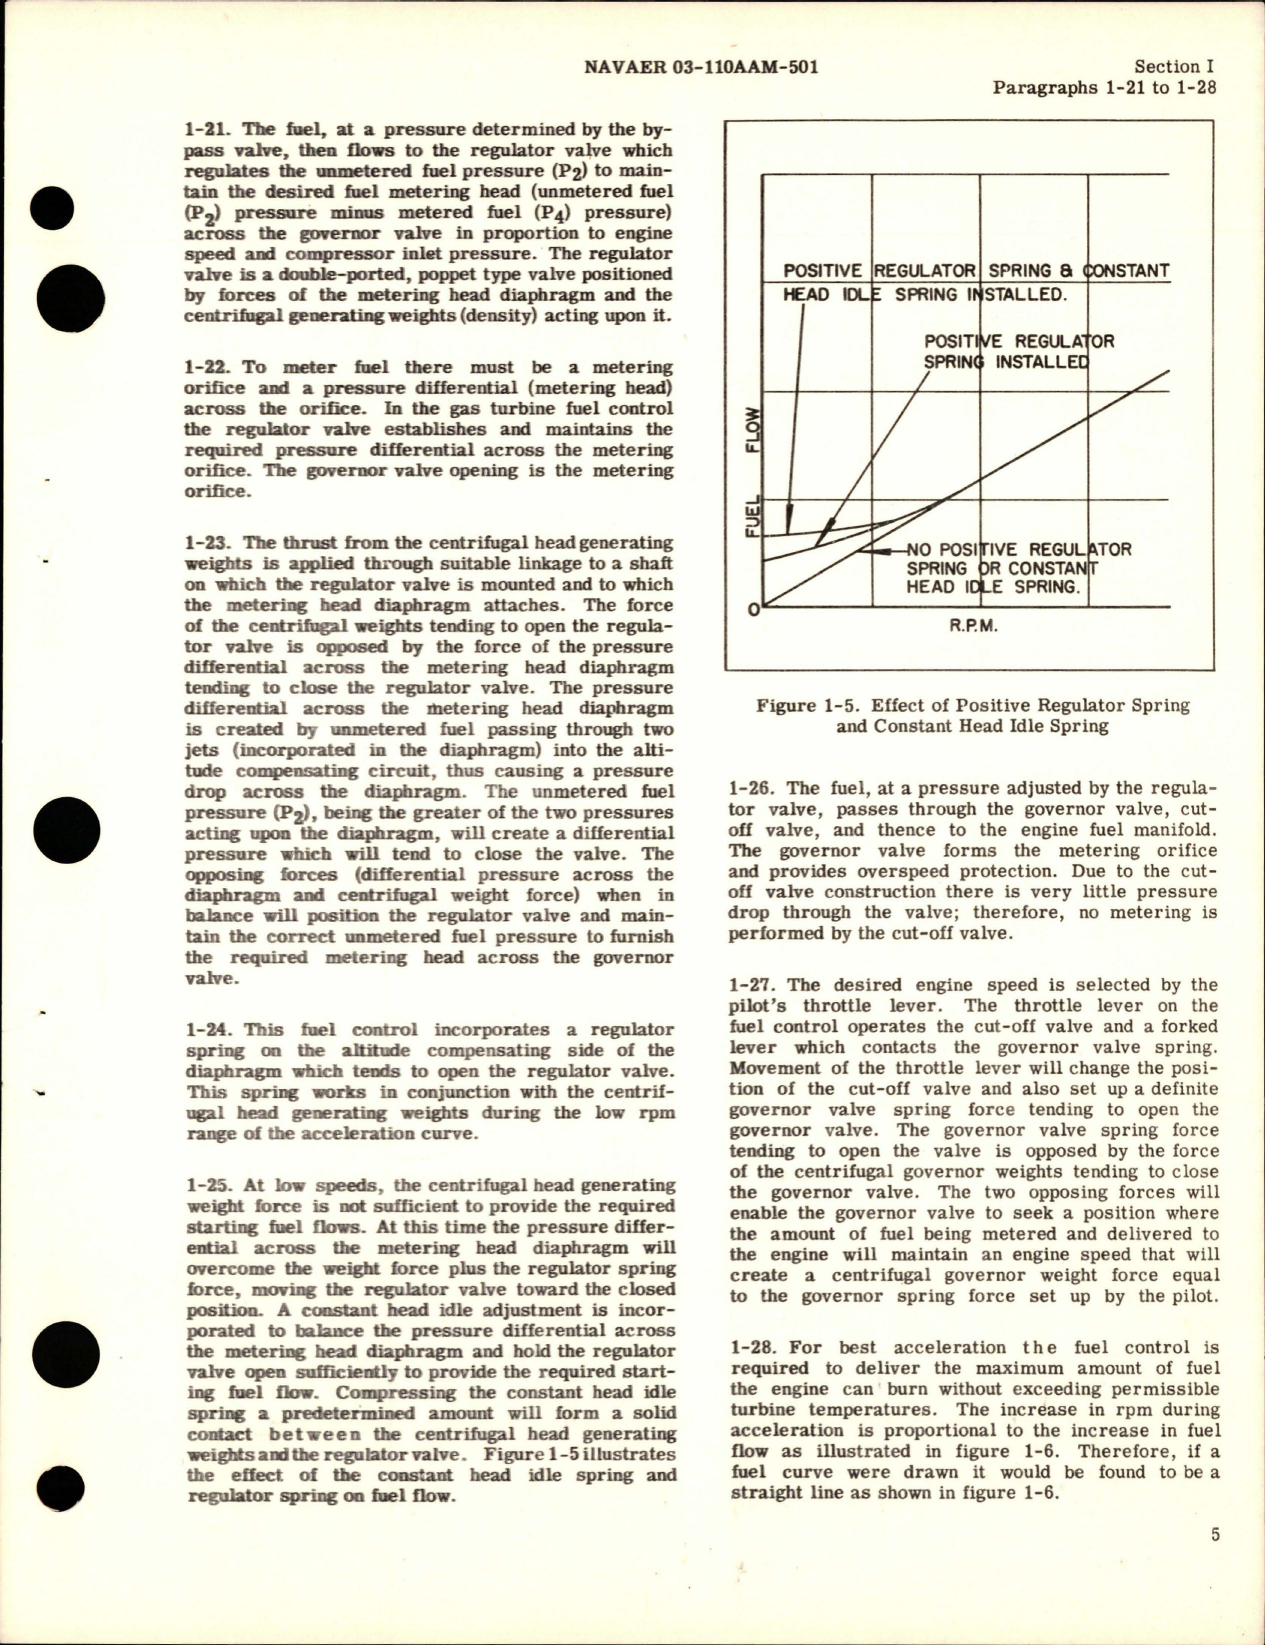 Sample page 9 from AirCorps Library document: Overhaul Instructions for Gas Turbine Fuel Control - Model TJ-E4